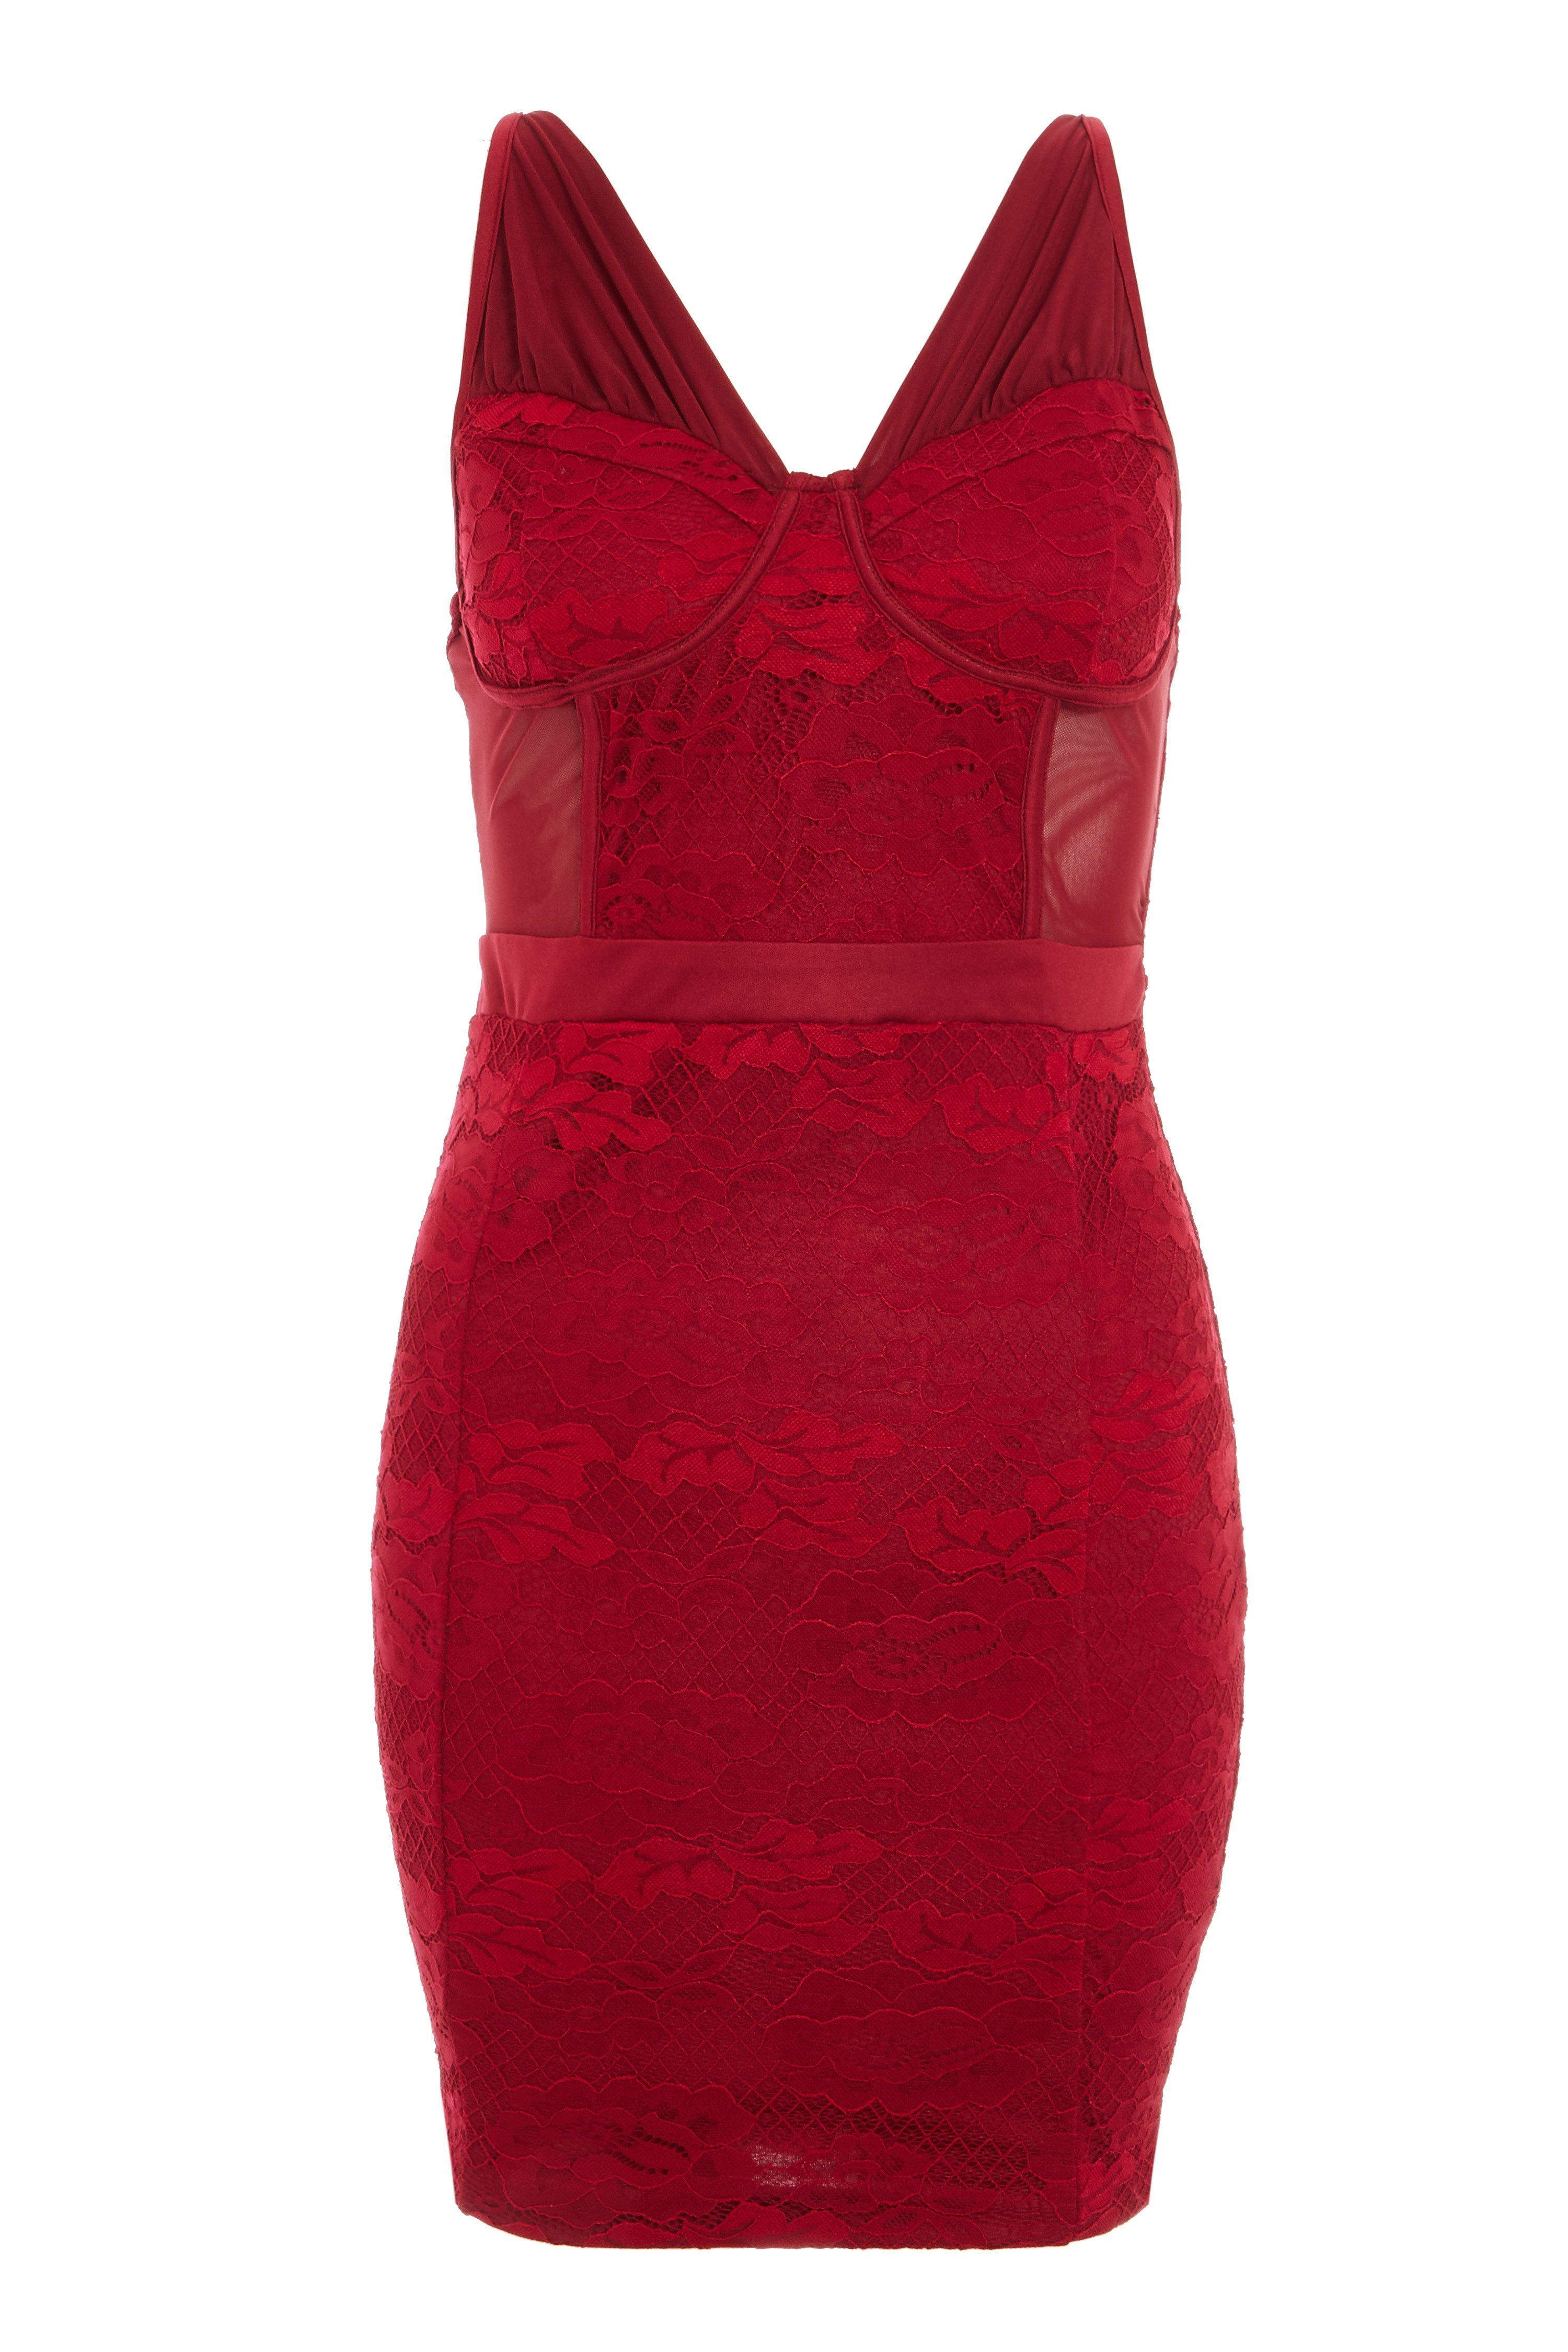 Petite Berry Lace Ruched Bodycon Dress - Quiz Clothing